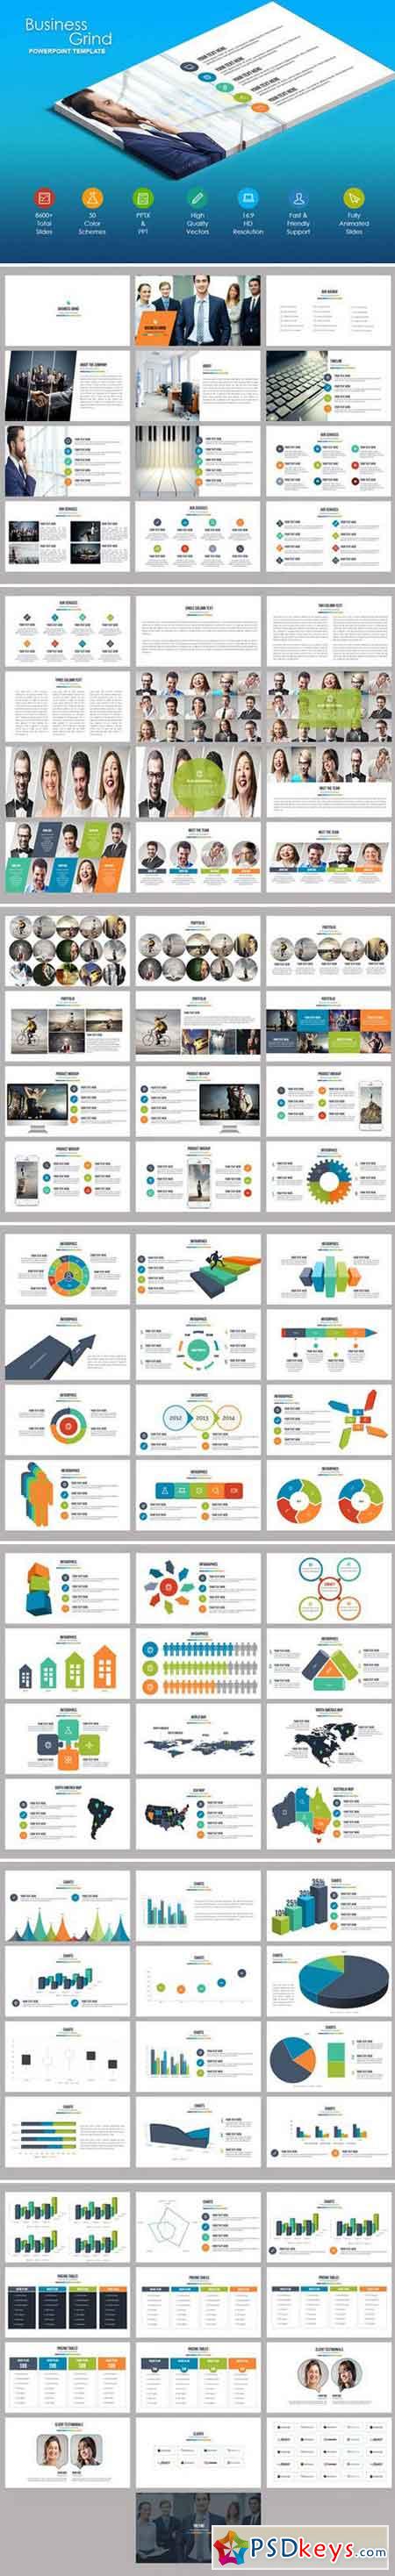 Business Grind Powerpoint Template 785188